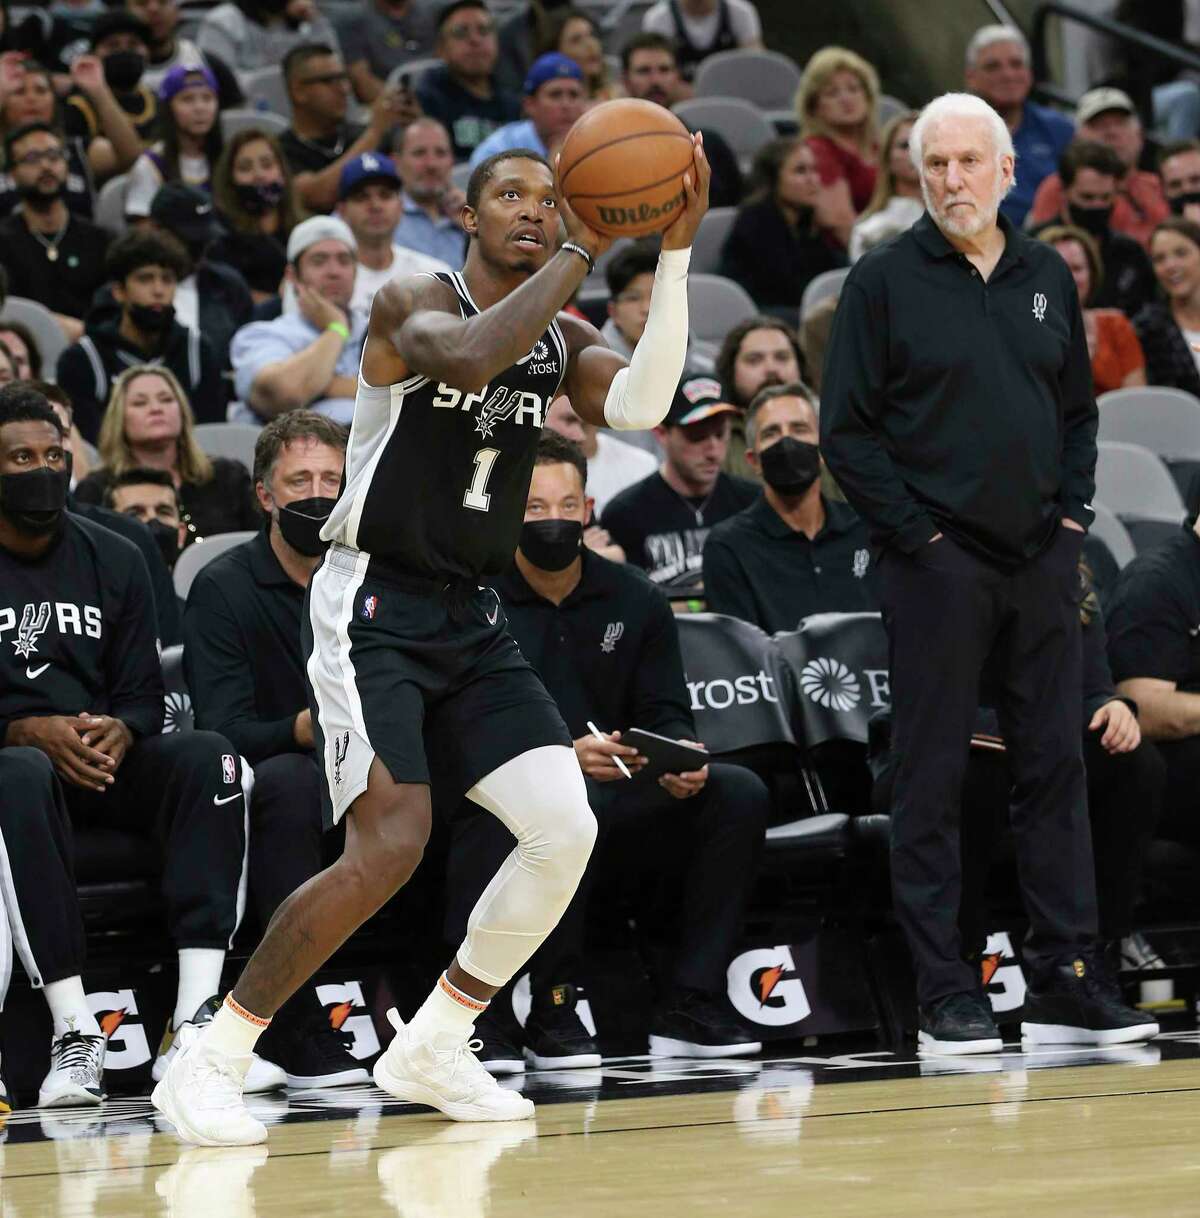 Spurs' Lonnie Walker IV (01) lines up a three-pointer as Spurs head coach Gregg Popovich looks on during the game against the Lakers at the AT&T Center on Tuesday, Oct. 26, 2021.